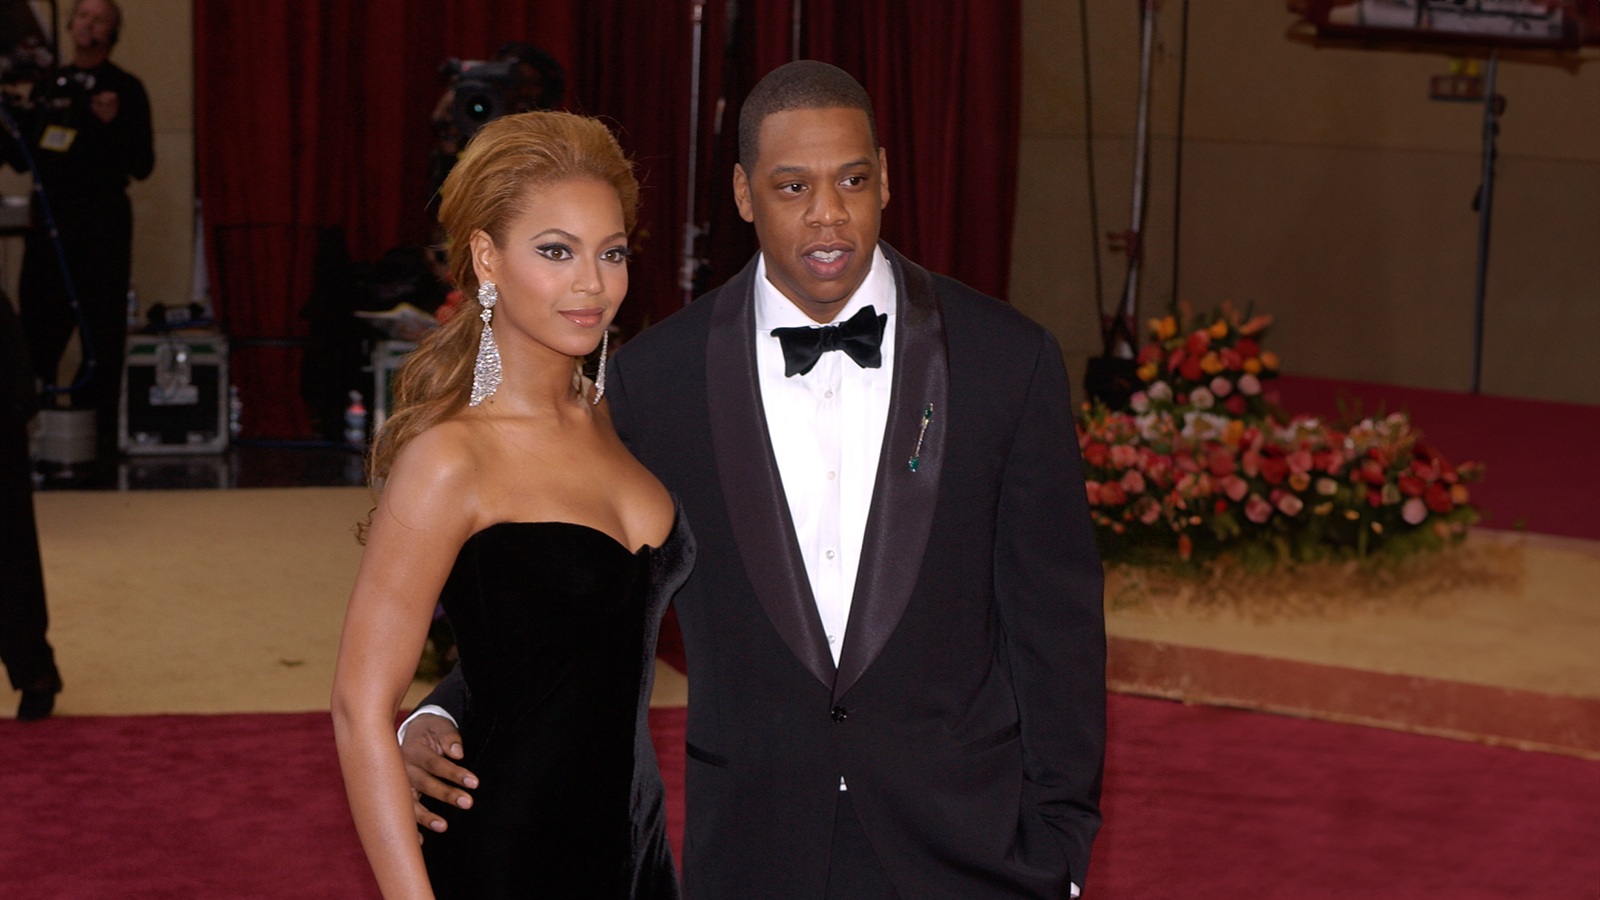 BEYONCE KNOWLES & JAY-Z at the 77th Annual Academy Awards at the Kodak Theatre, Hollywood, CA February 27, 2005; Los Angeles, CA. Paul Smith / Featureflash